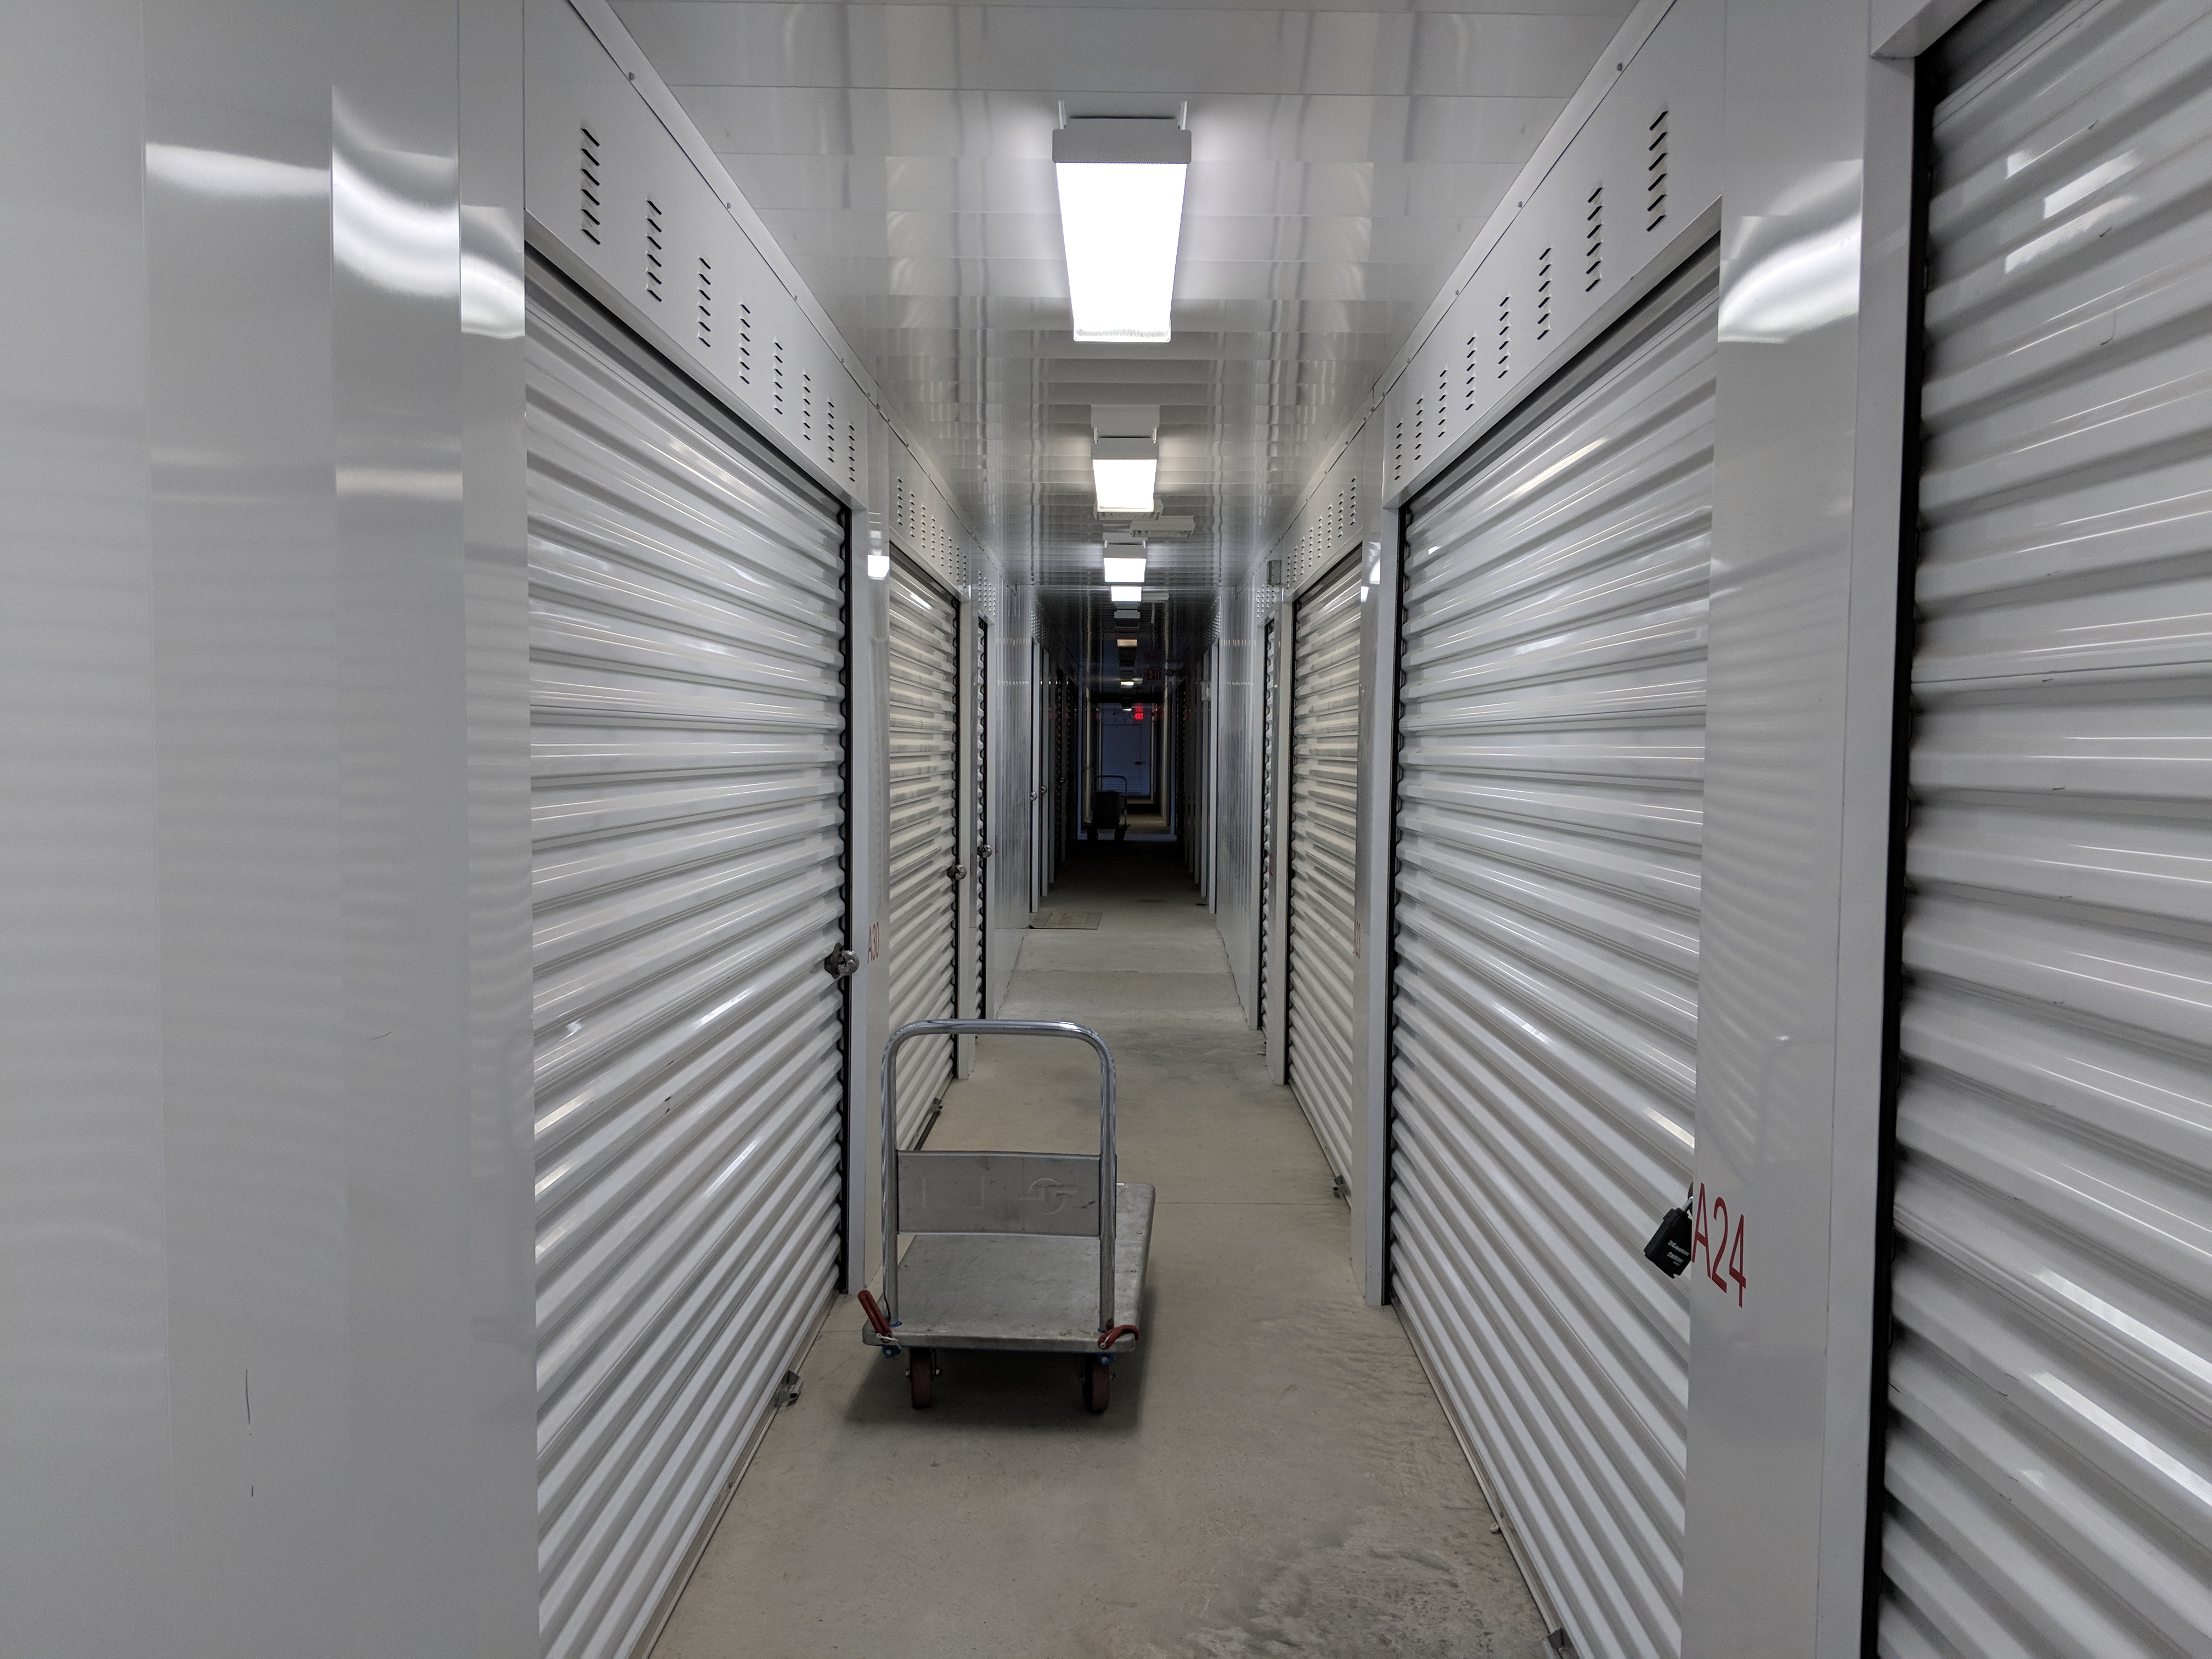 Climate Controlled Self Storage